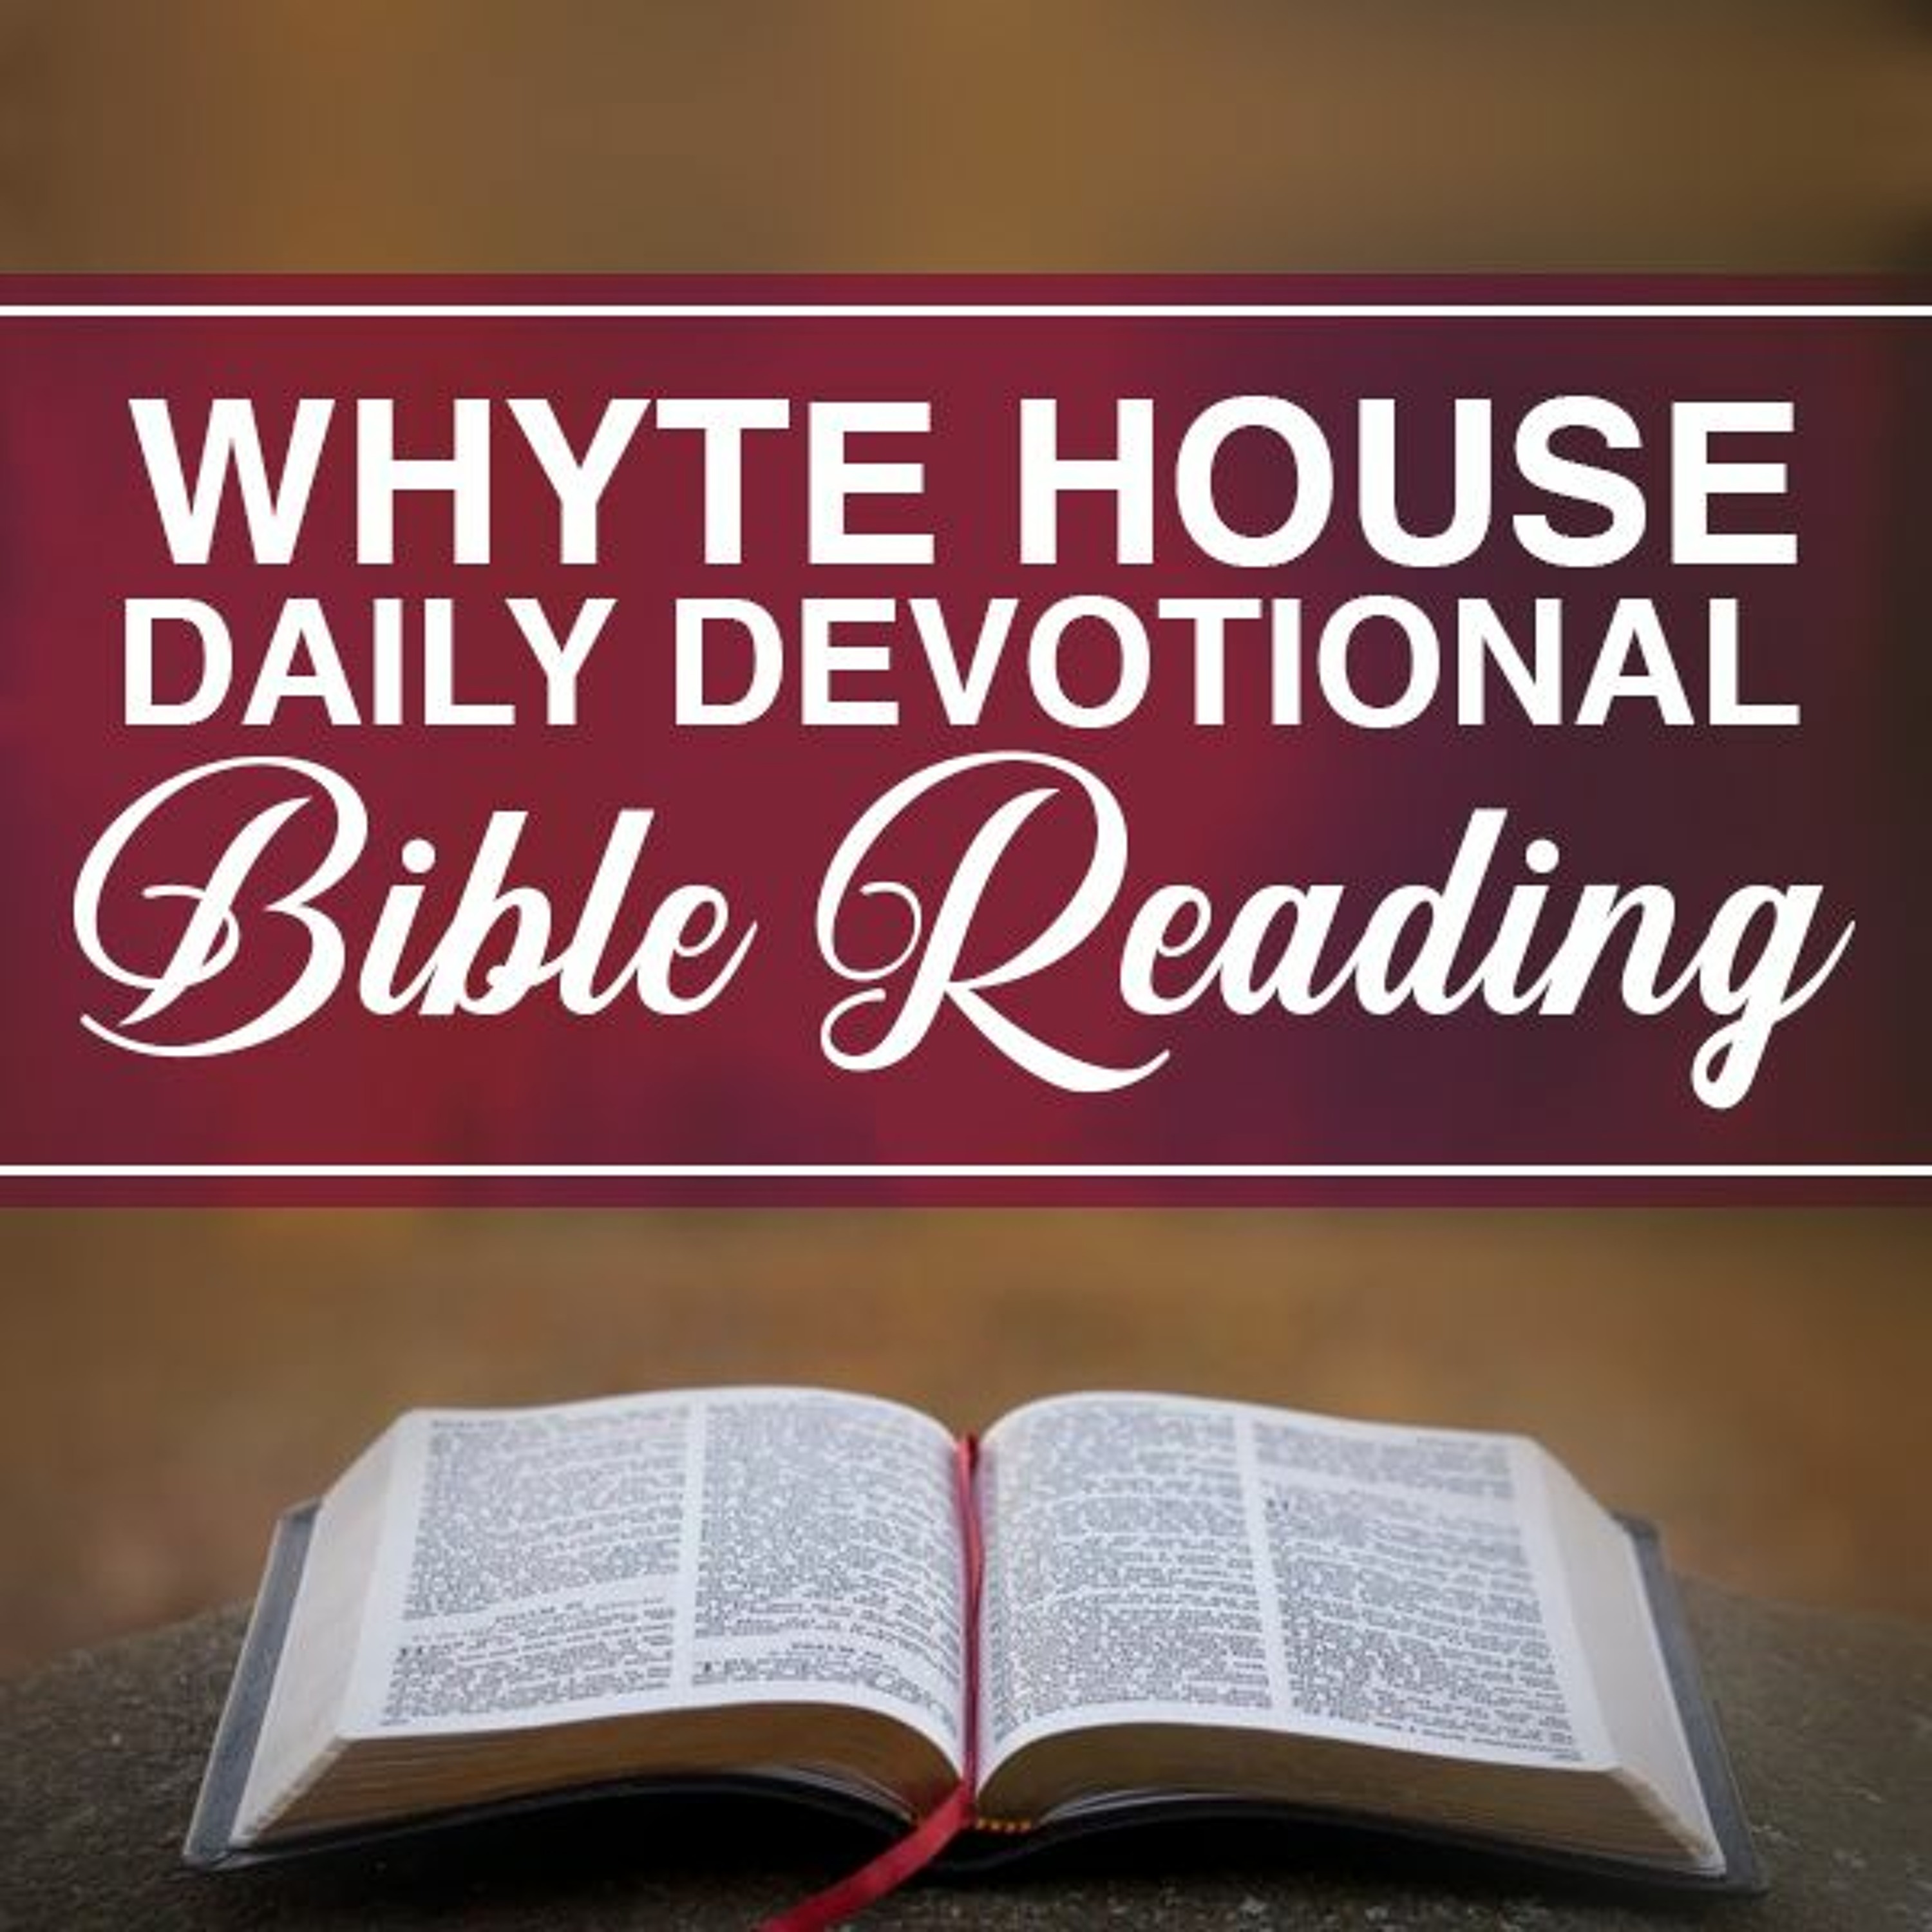 Whyte House Daily Reading of the Chronological Bible #709: 2 Chronicles 14:9-15